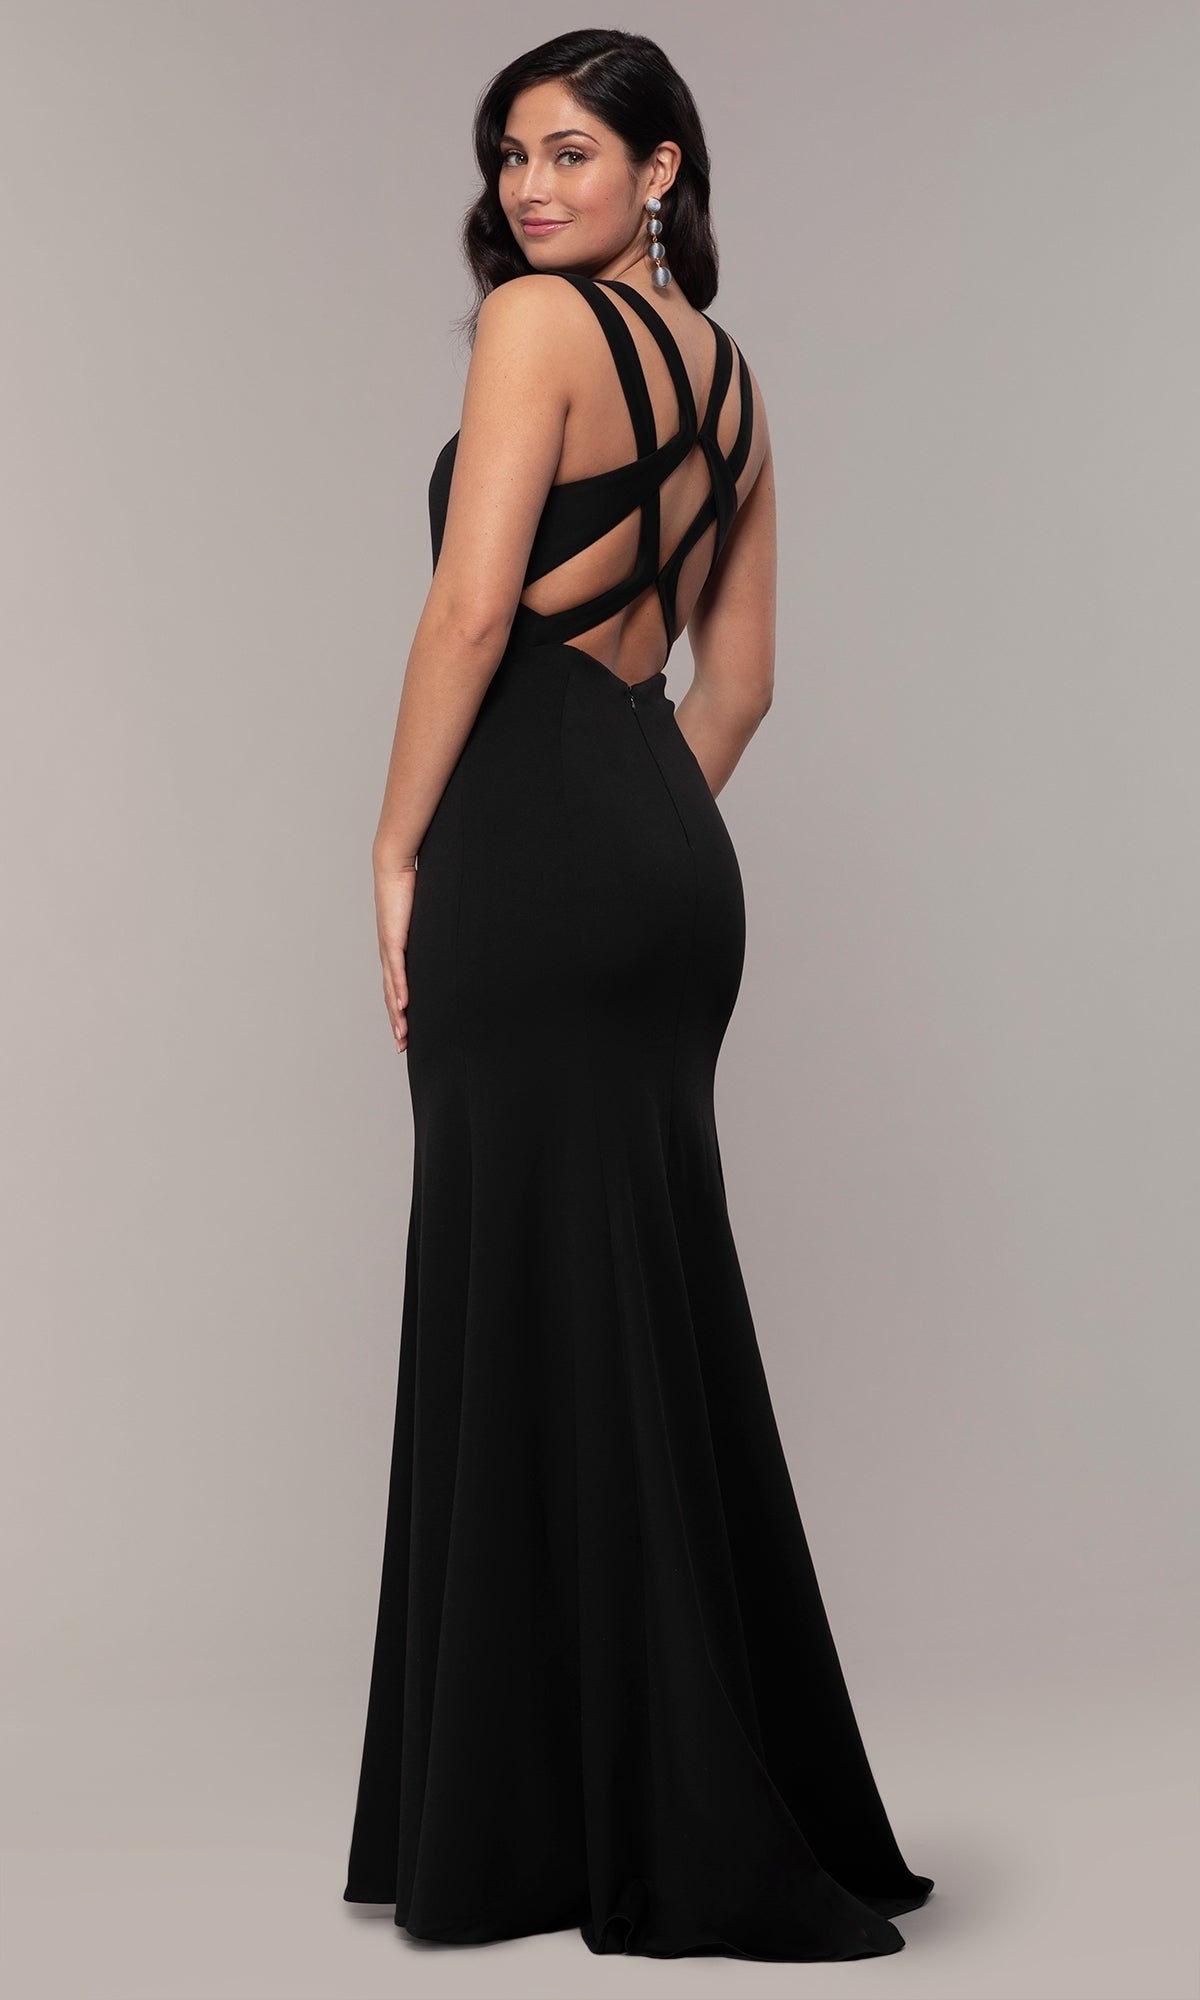 Strappy-Open-Back Long Formal Prom Dress 8232 Black / XSmall